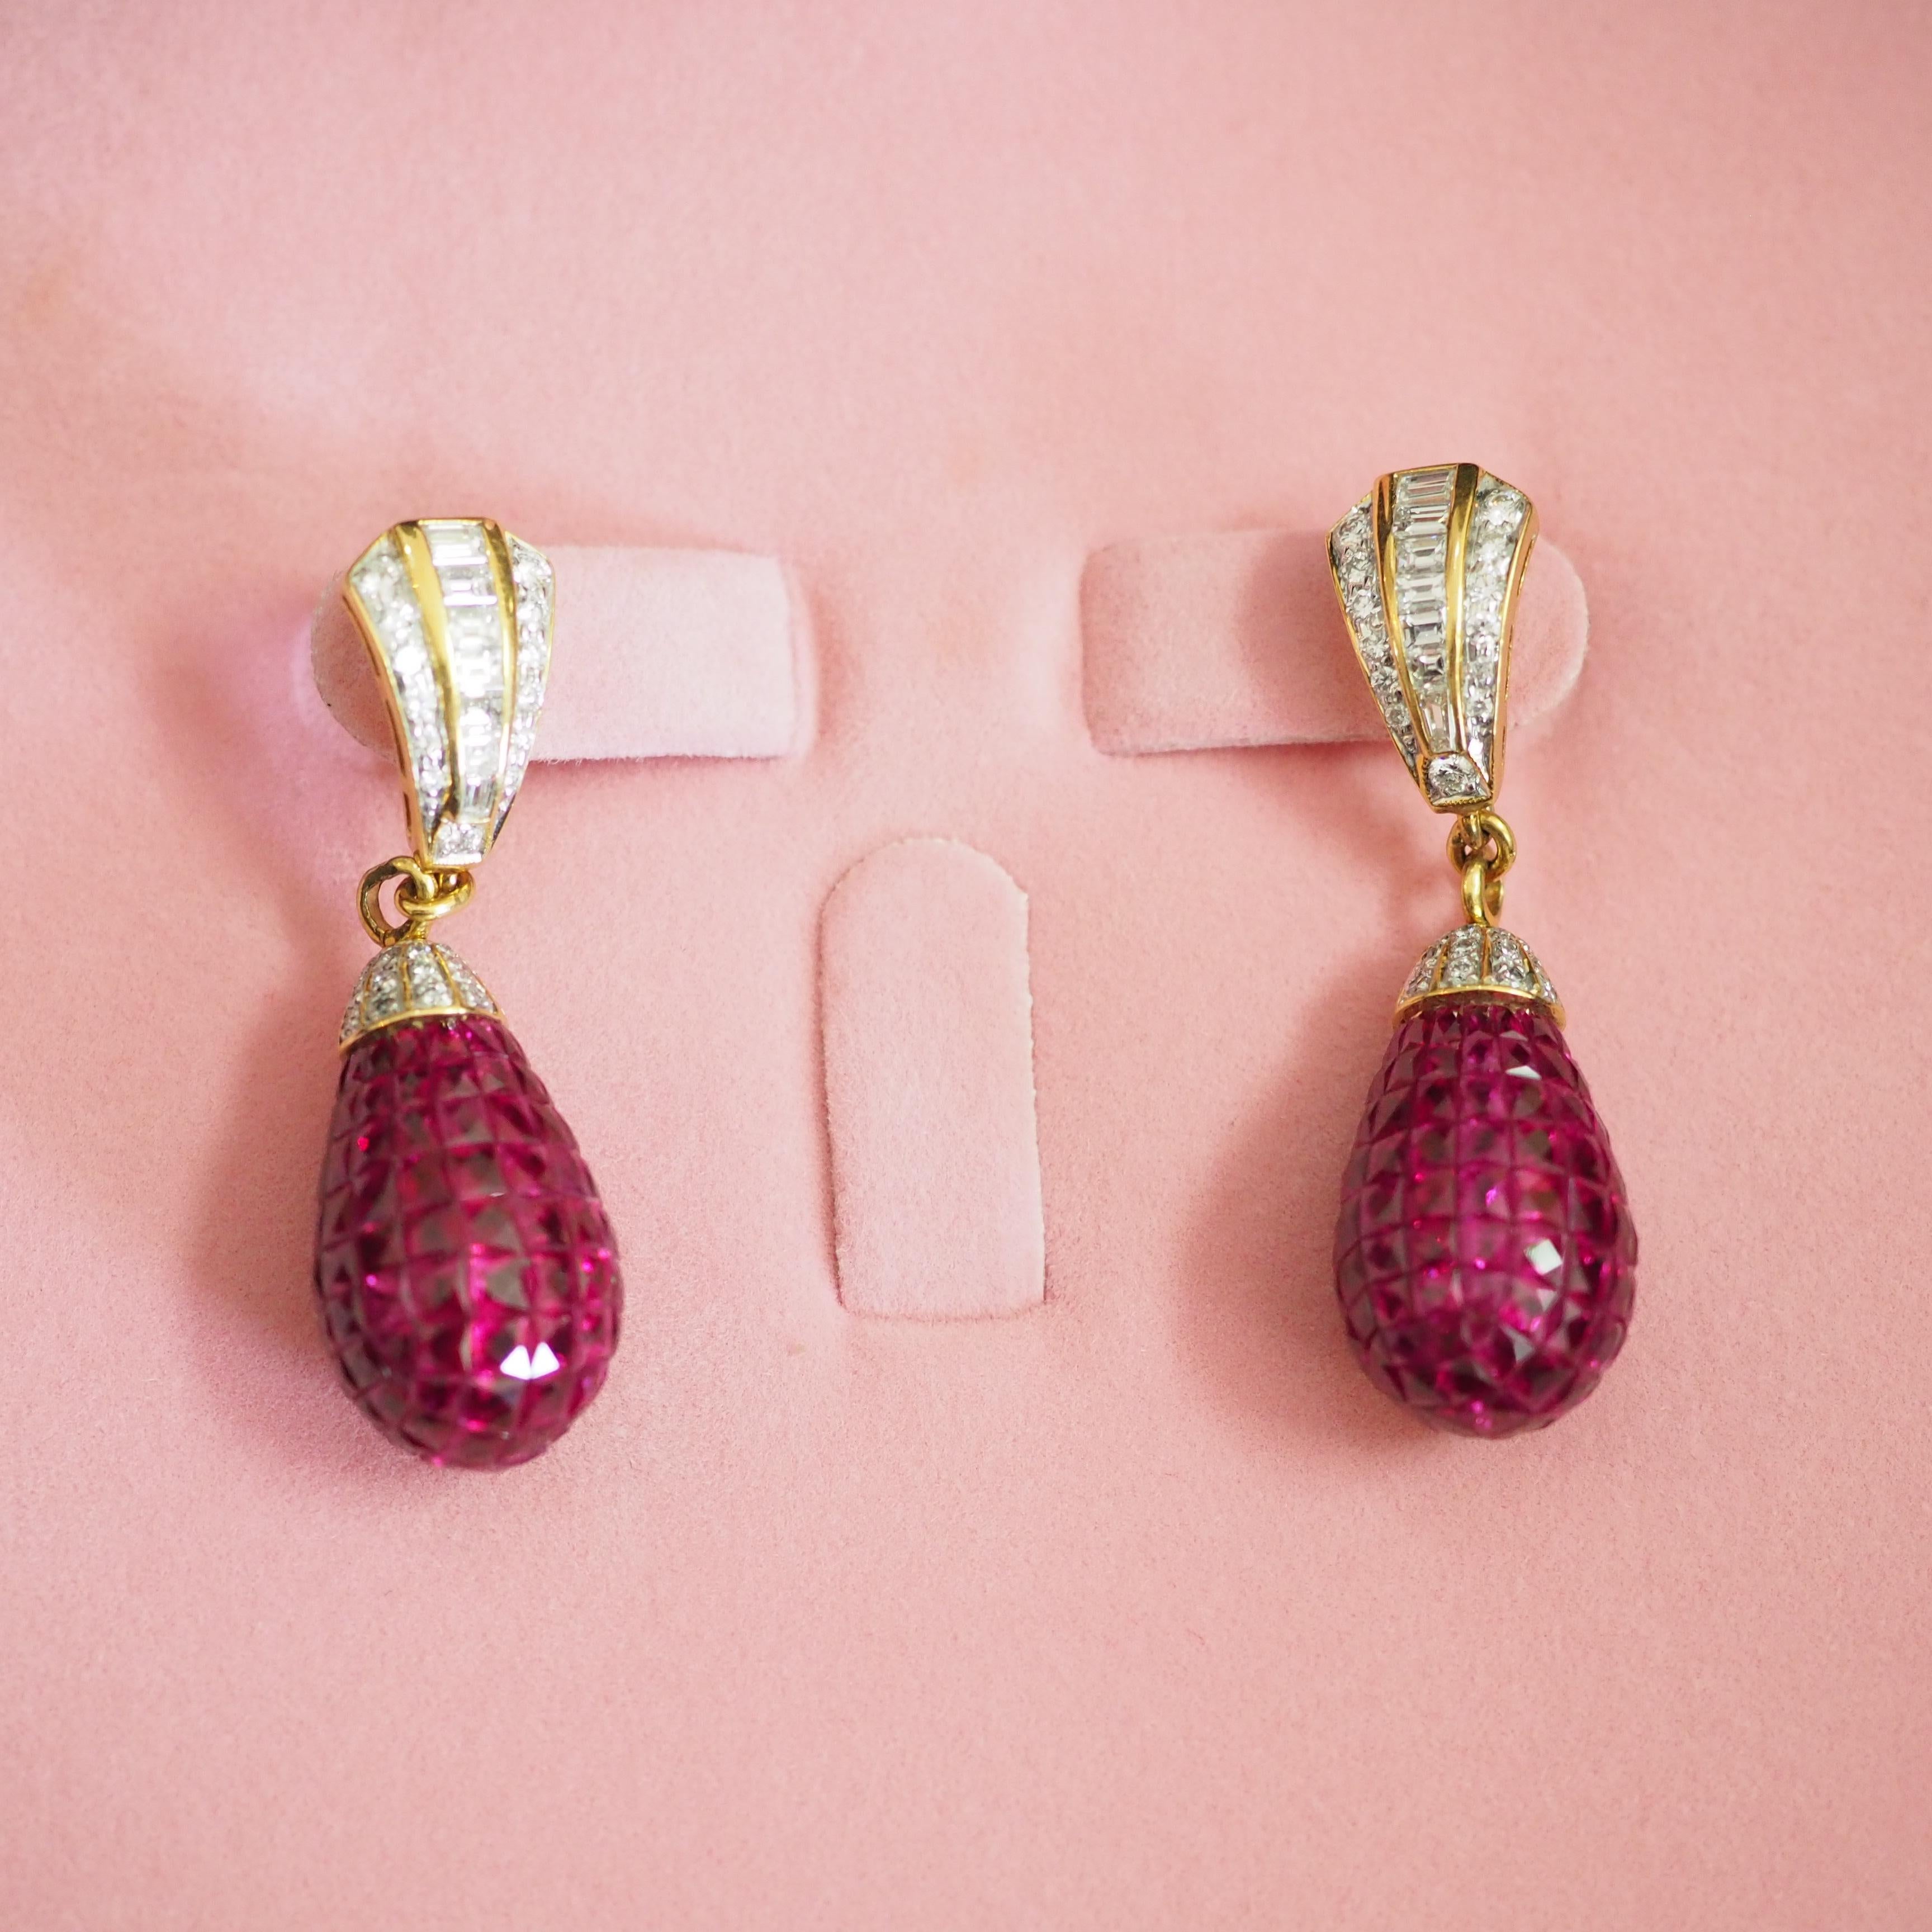 This wonderful Fabergé earring piece is a neo- vintage and has never been worn. This beautiful piece is crafted in Thailand using 18K yellow gold. The piece is adorned with numerous squared pinkish-red natural rubies and various good quality